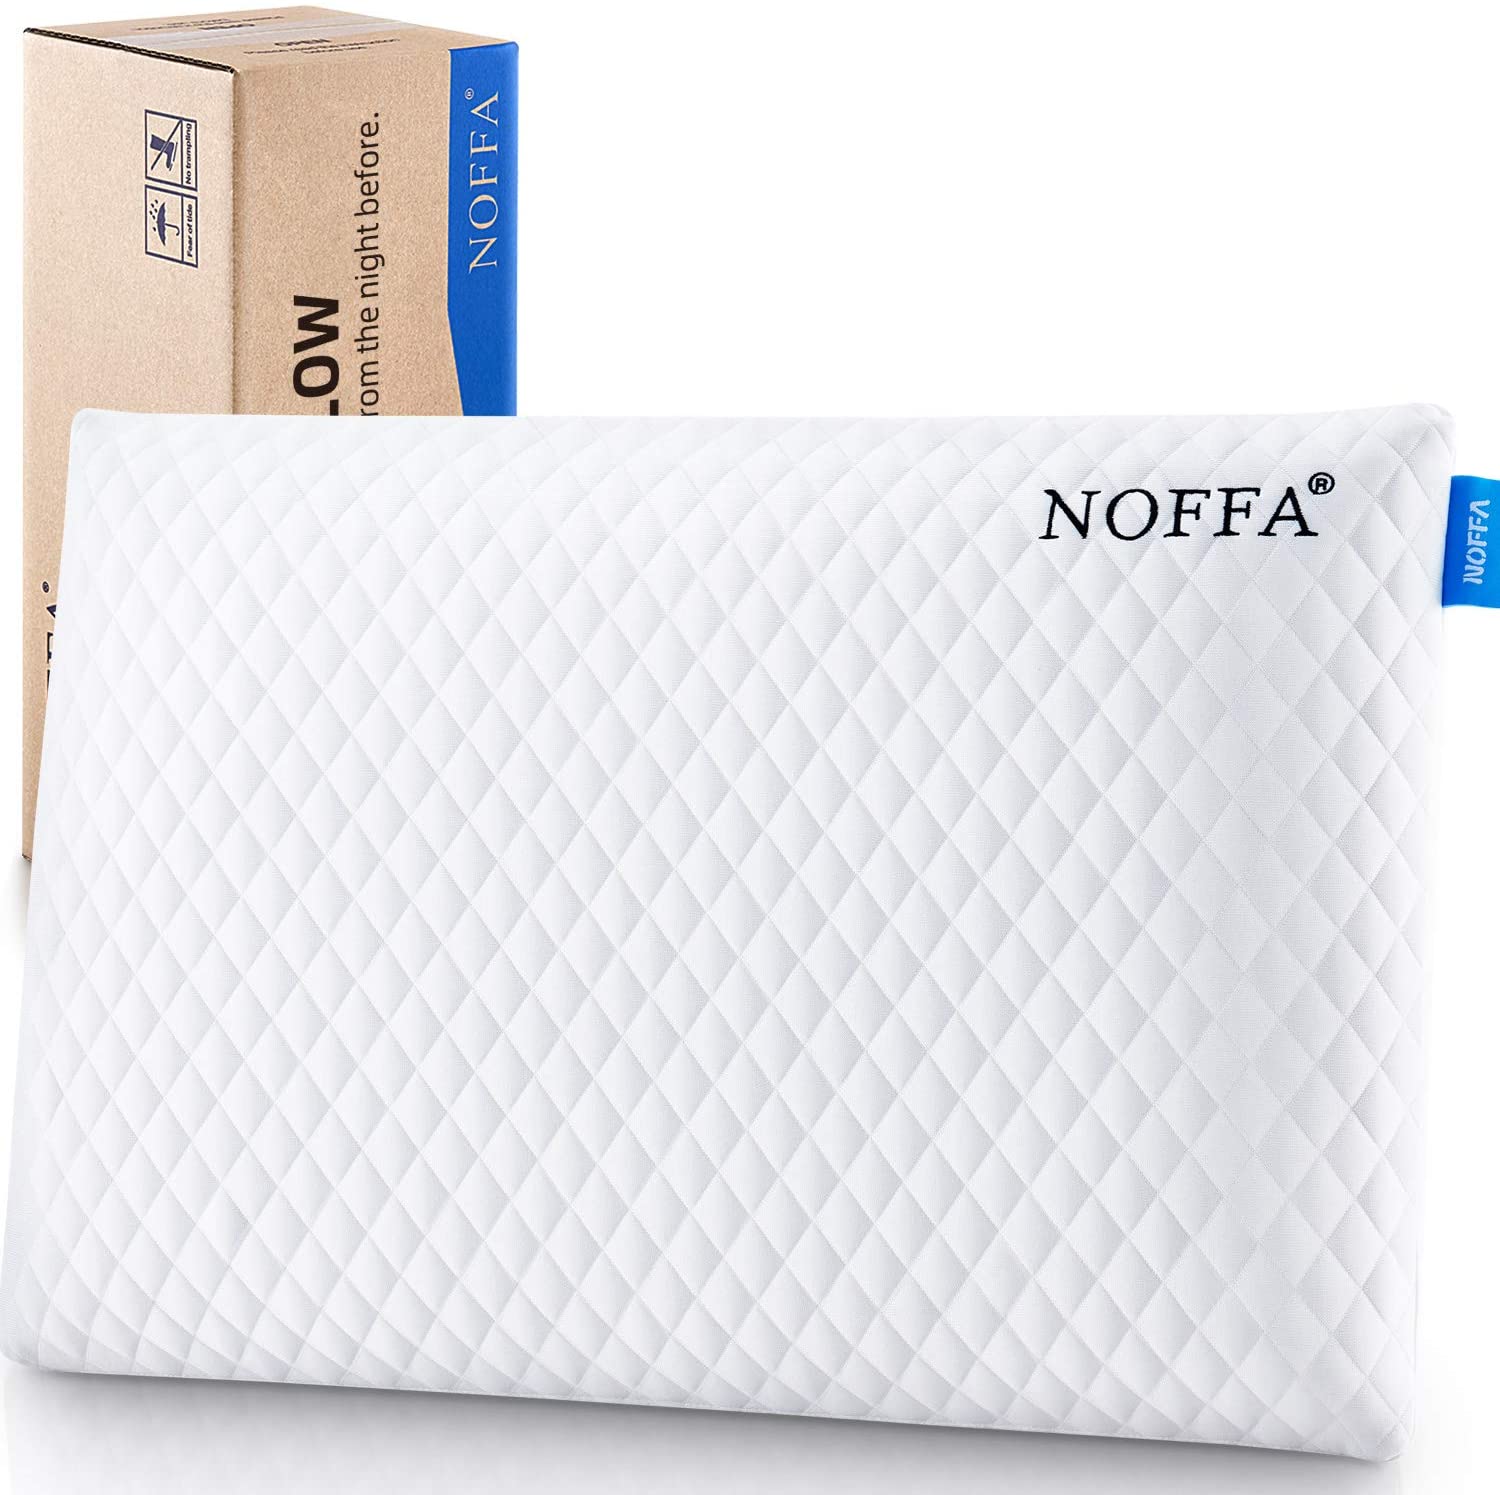 NOFFA Low Profile Memory Foam Pillow - Thin & Firm for Stomach Sleeping & Kids - Medium Support - 60x40x6cm 2